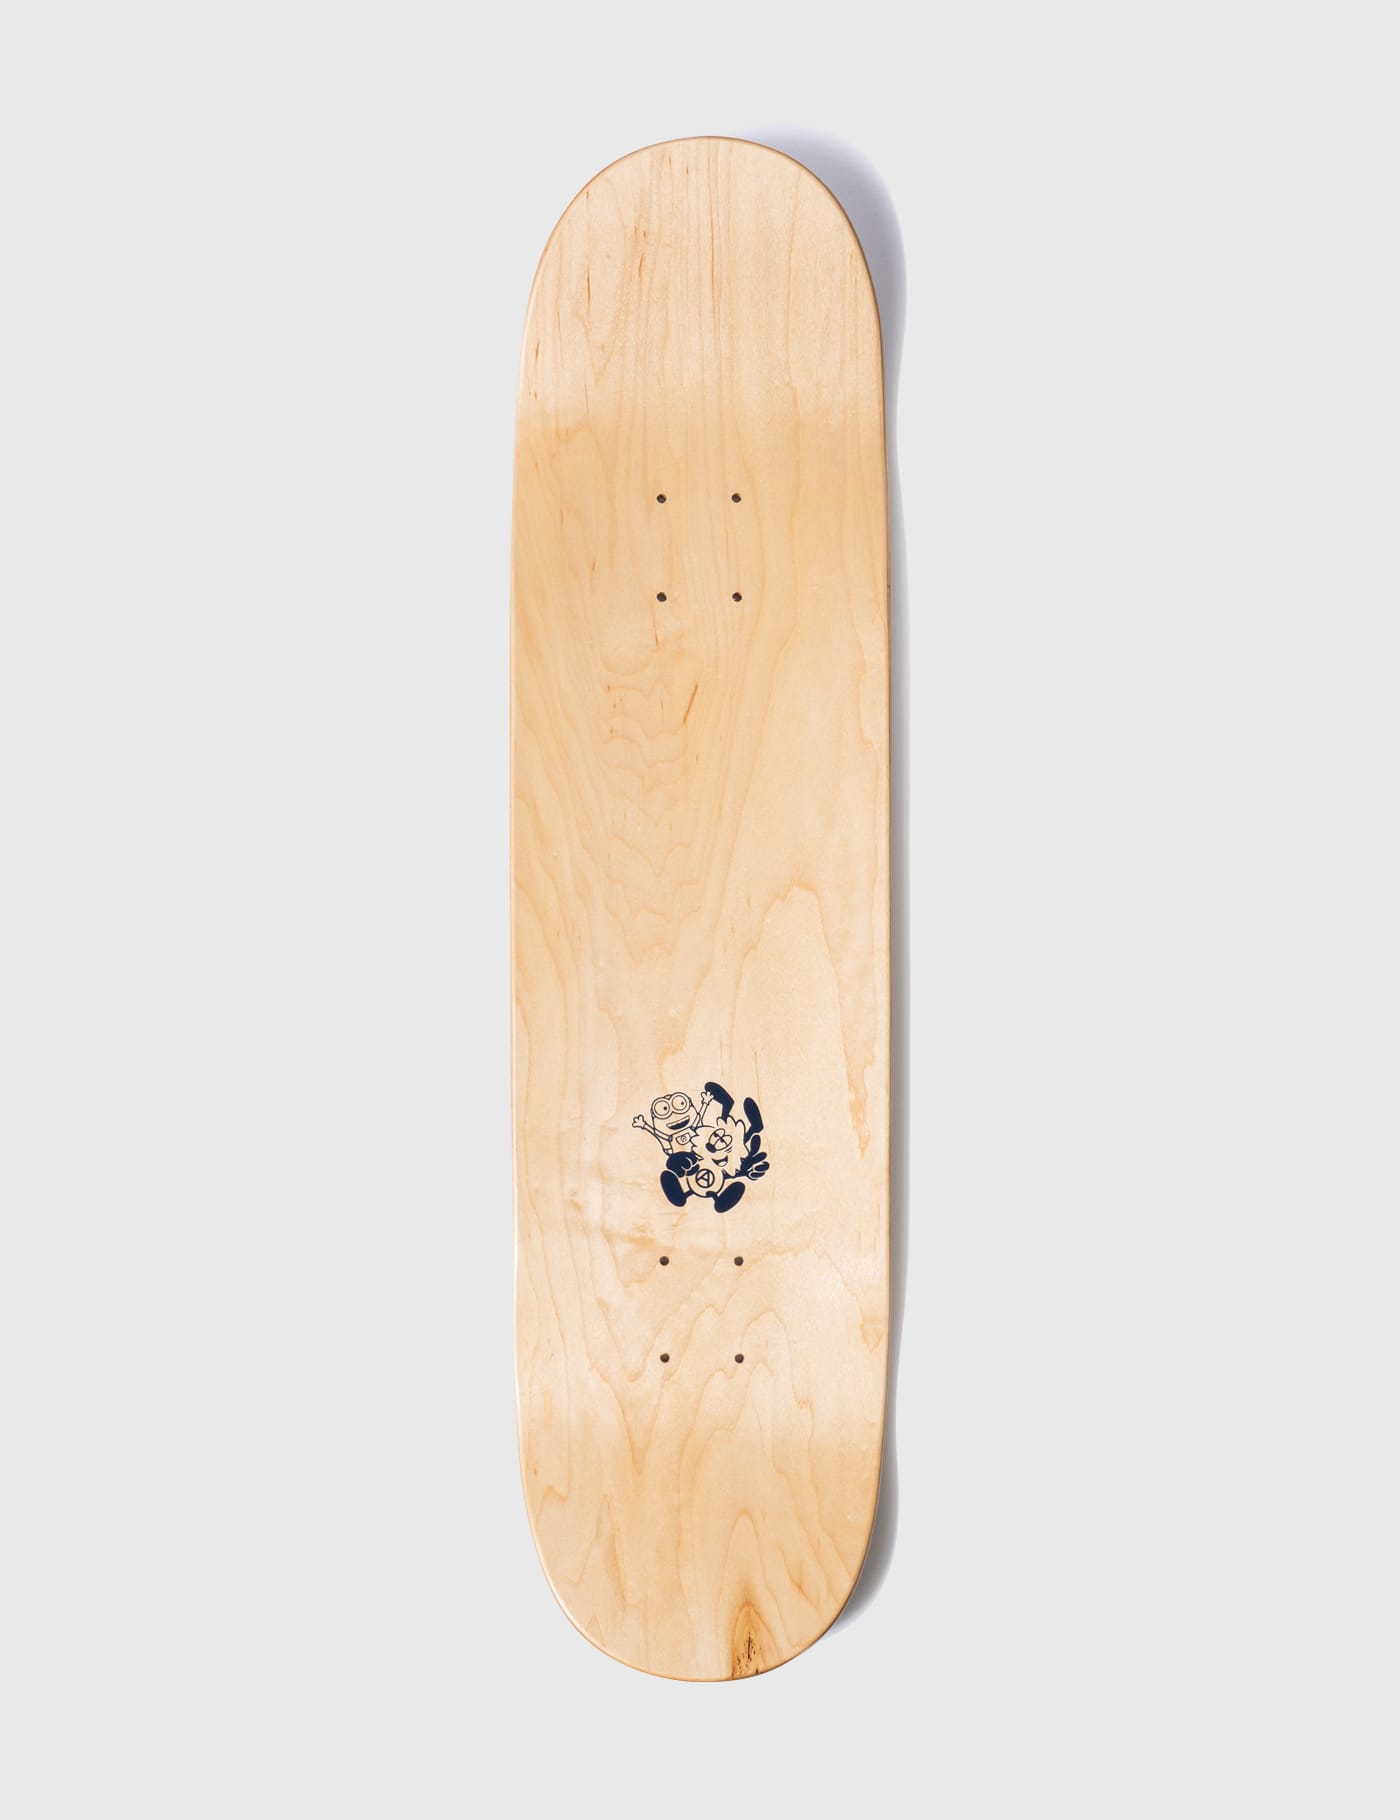 Wasted youth ( Verdy ) Skateboard デッキ - その他スポーツ